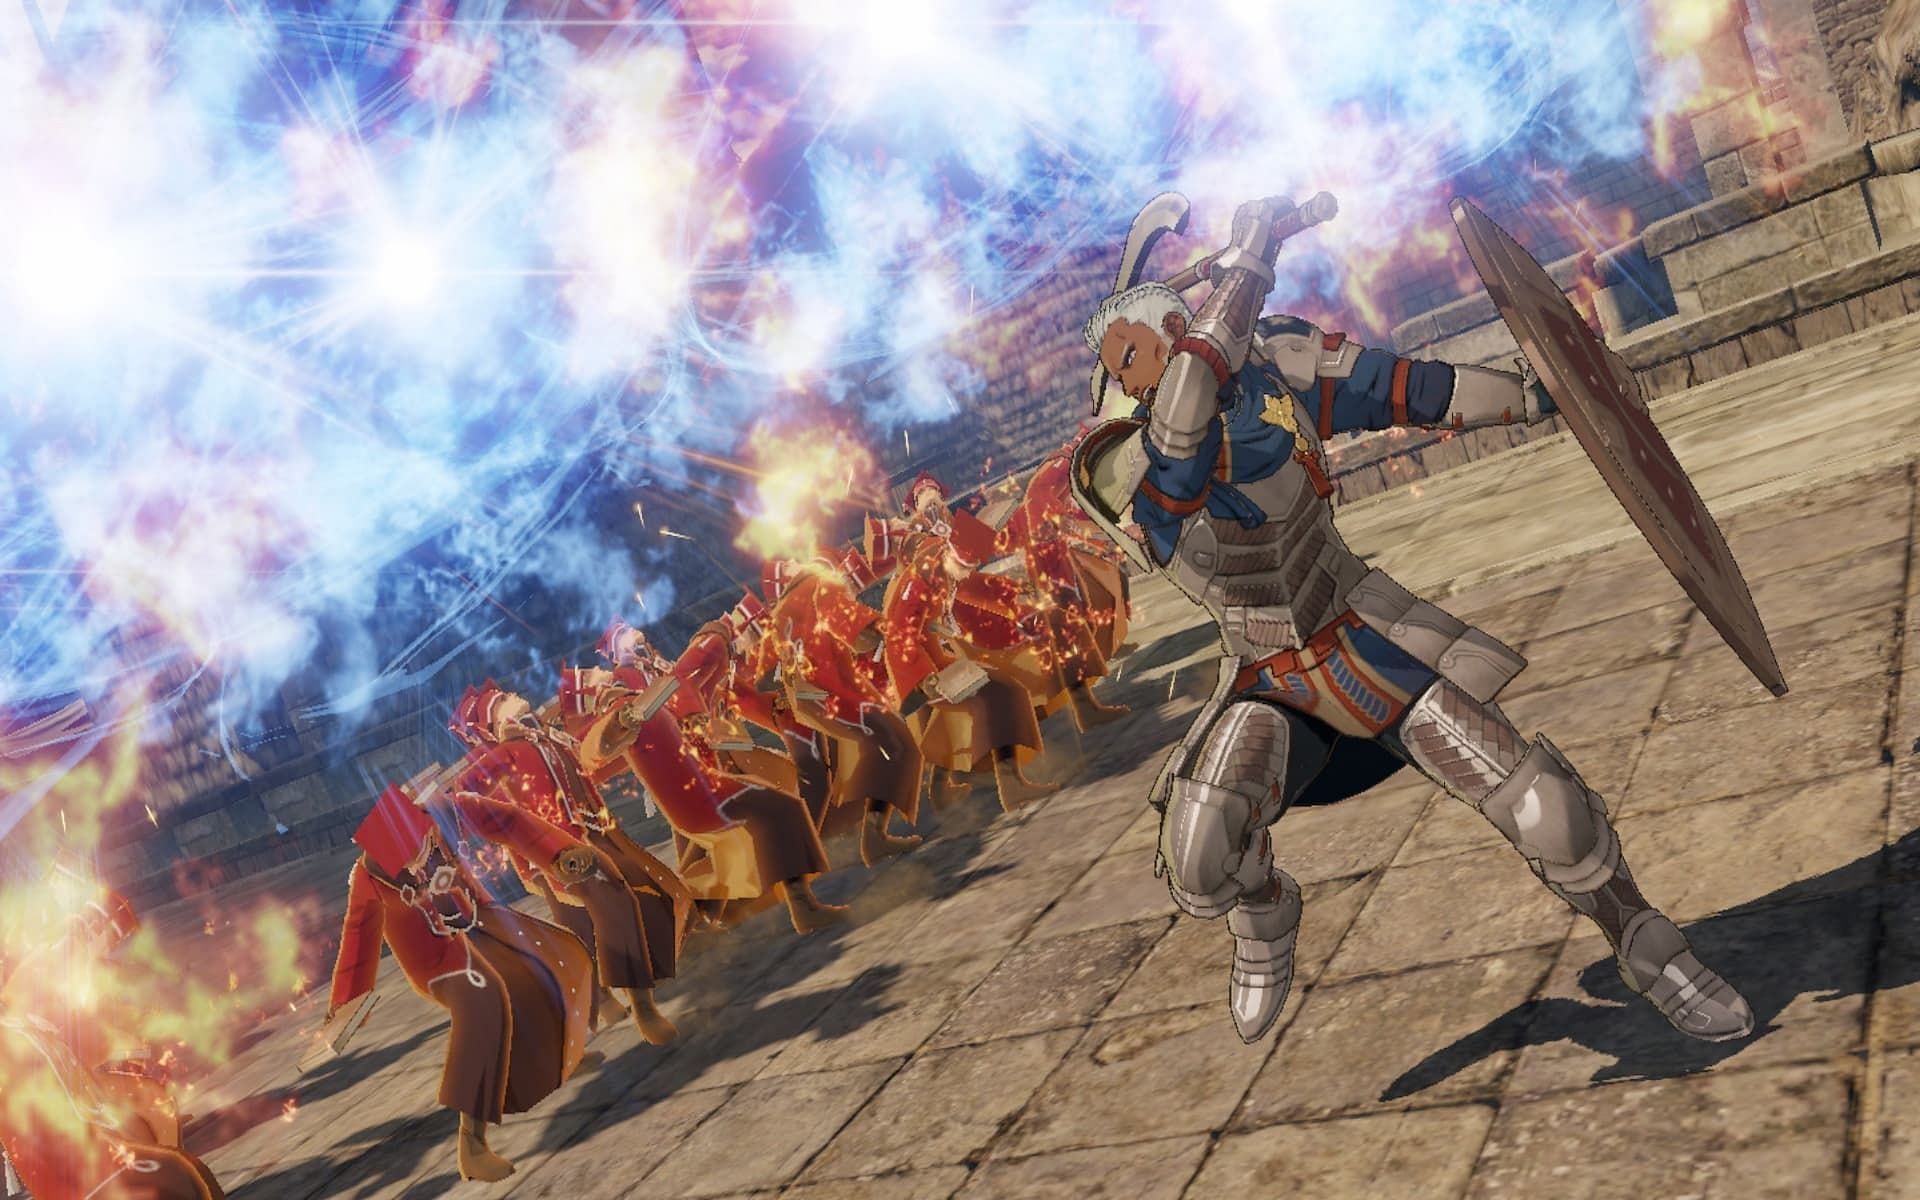 Fire Emblem Warriors: Three Hopes gives players control over how they battle (Image via Nintendo)